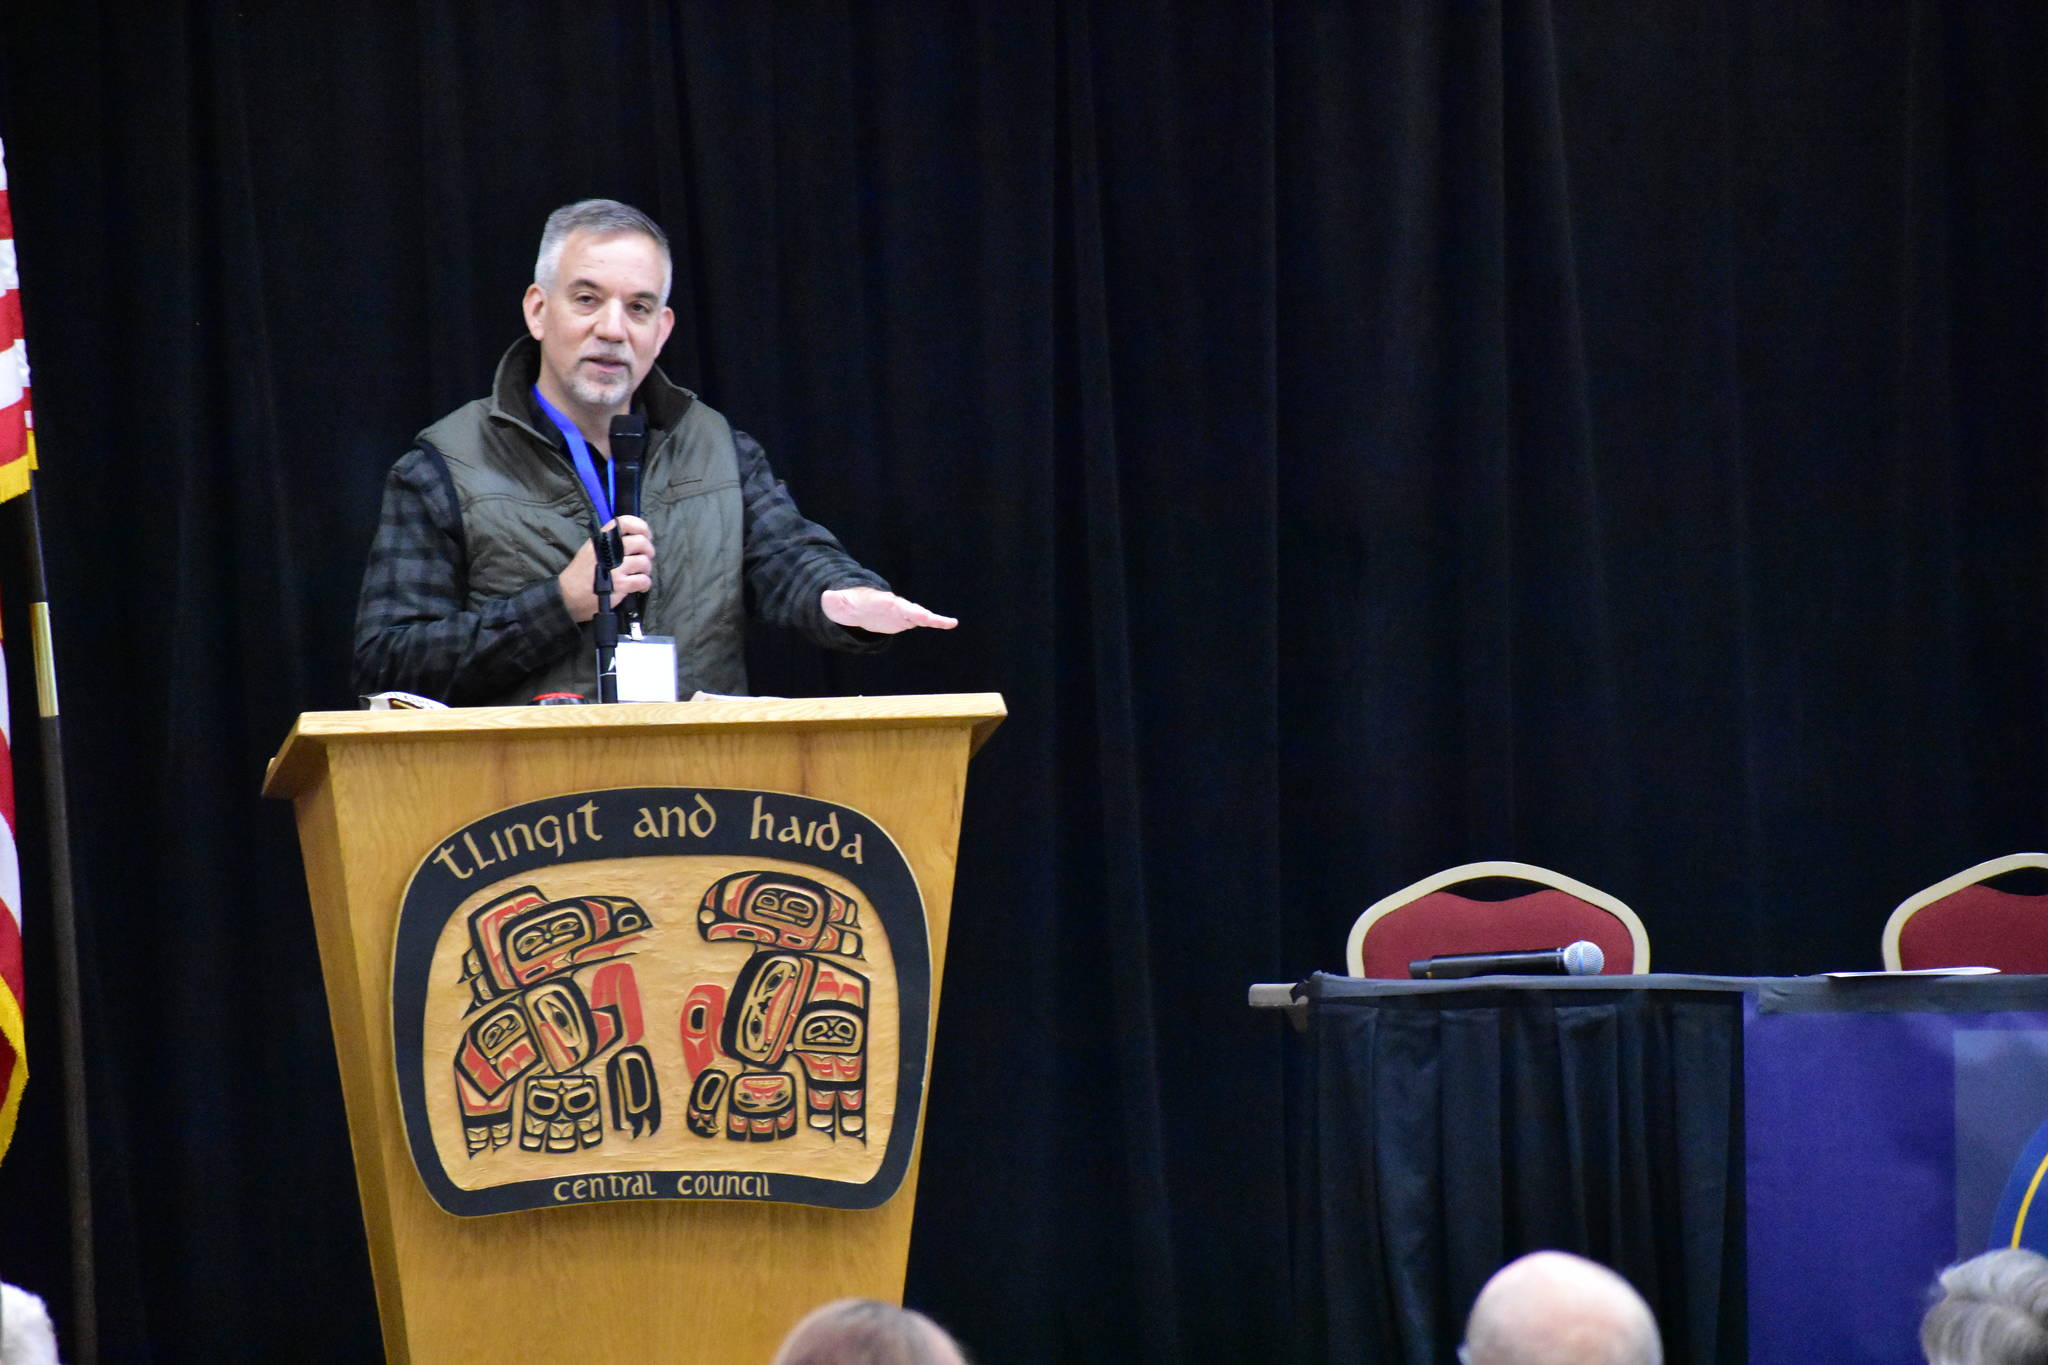 Howard Sherman, executive vice president of onboard revenue and destination services for Norwegian Cruise Lines speaks at the Southeast Conference Mid-Session Conference at Elizabeth Peratovich Hall on Wednesday, Feb. 5, 2020. (Peter Segall | Juneau Empire)